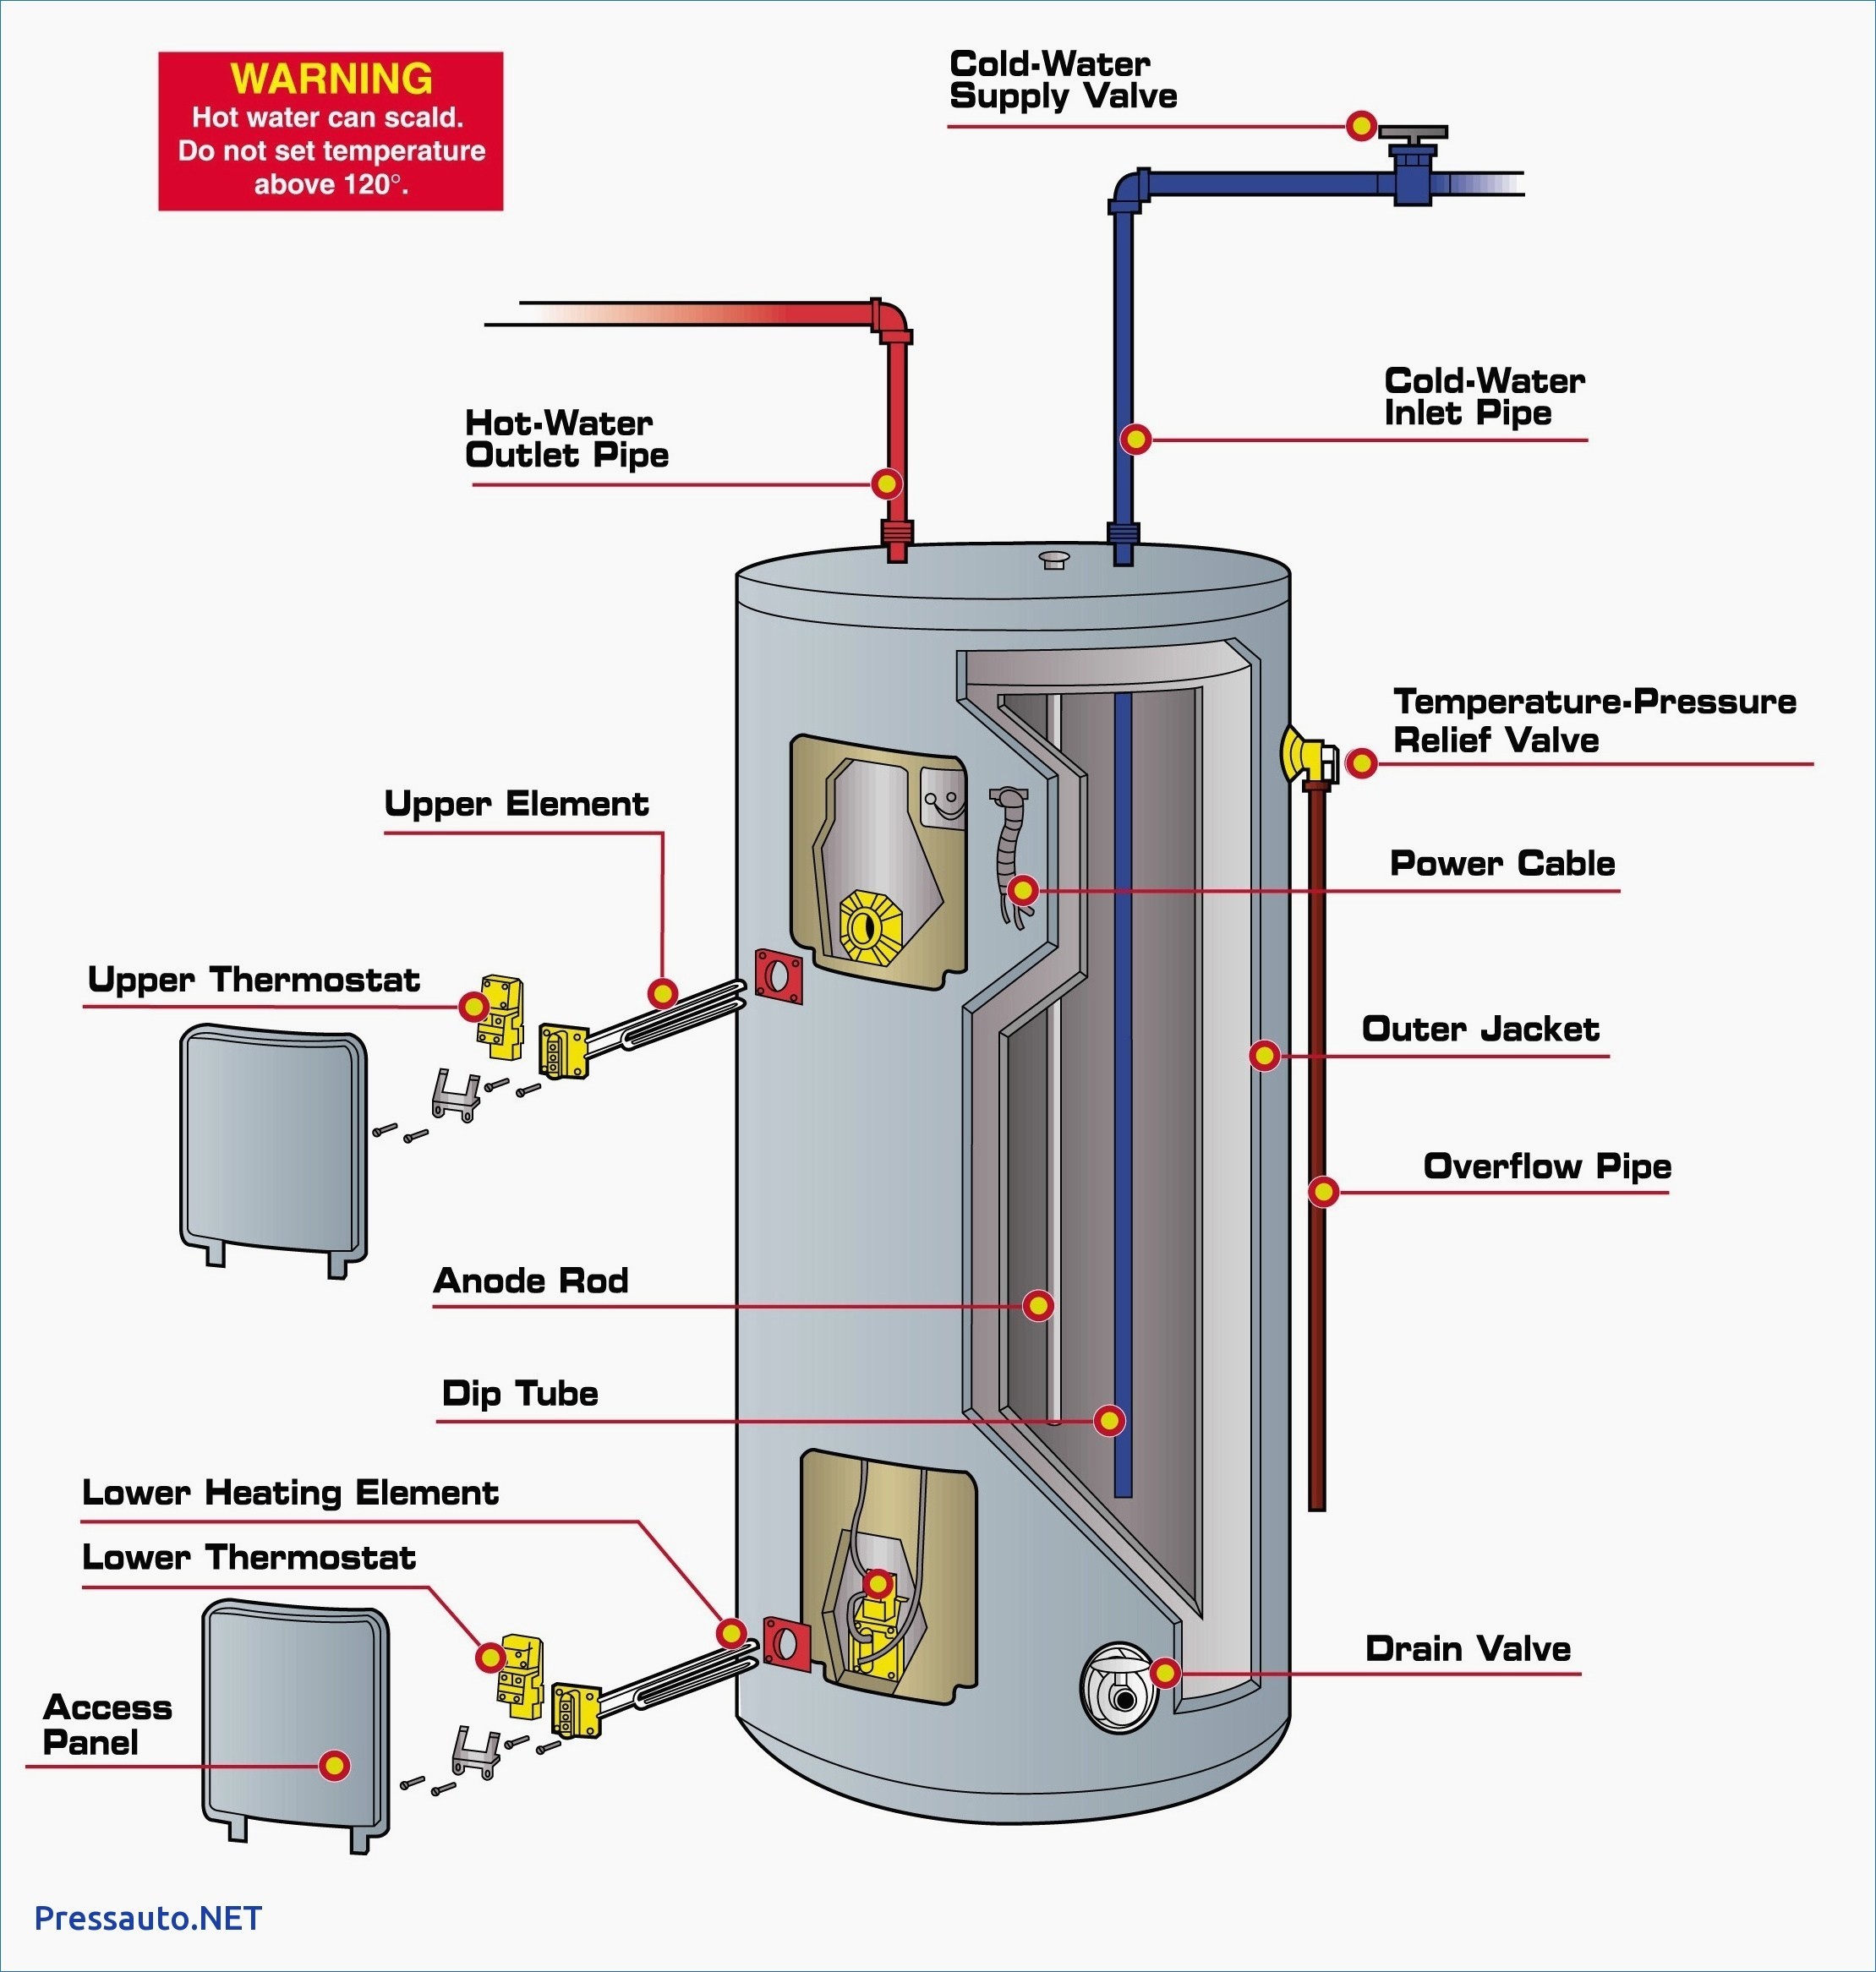 Wiring Diagram Electric Water Heater Fresh New Hot Water Heater Wiring Diagram Diagram